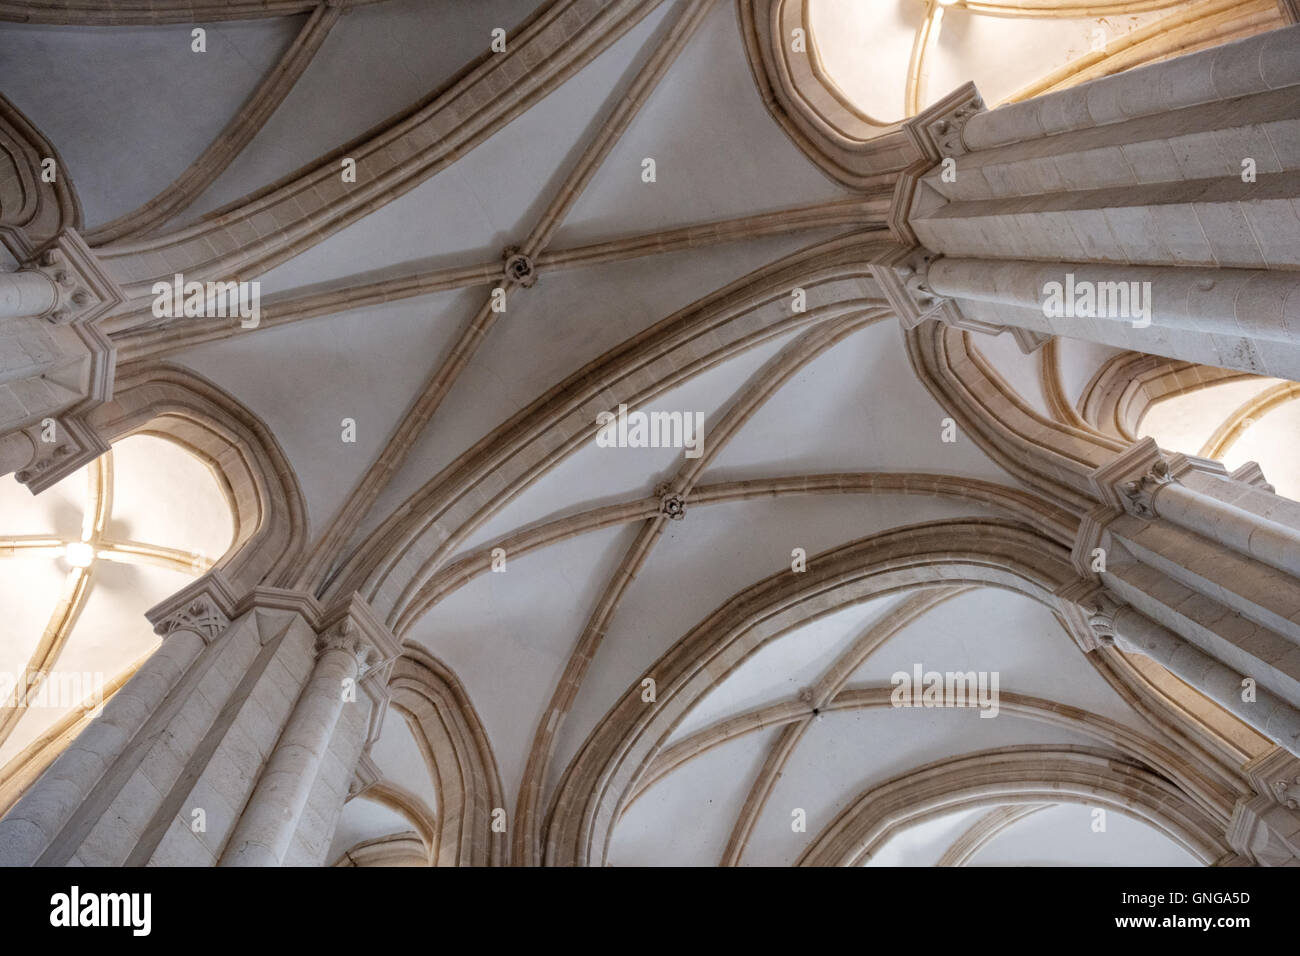 The columns and vaulted roof of the church at the Alcobaça Monastery, Portugal Stock Photo